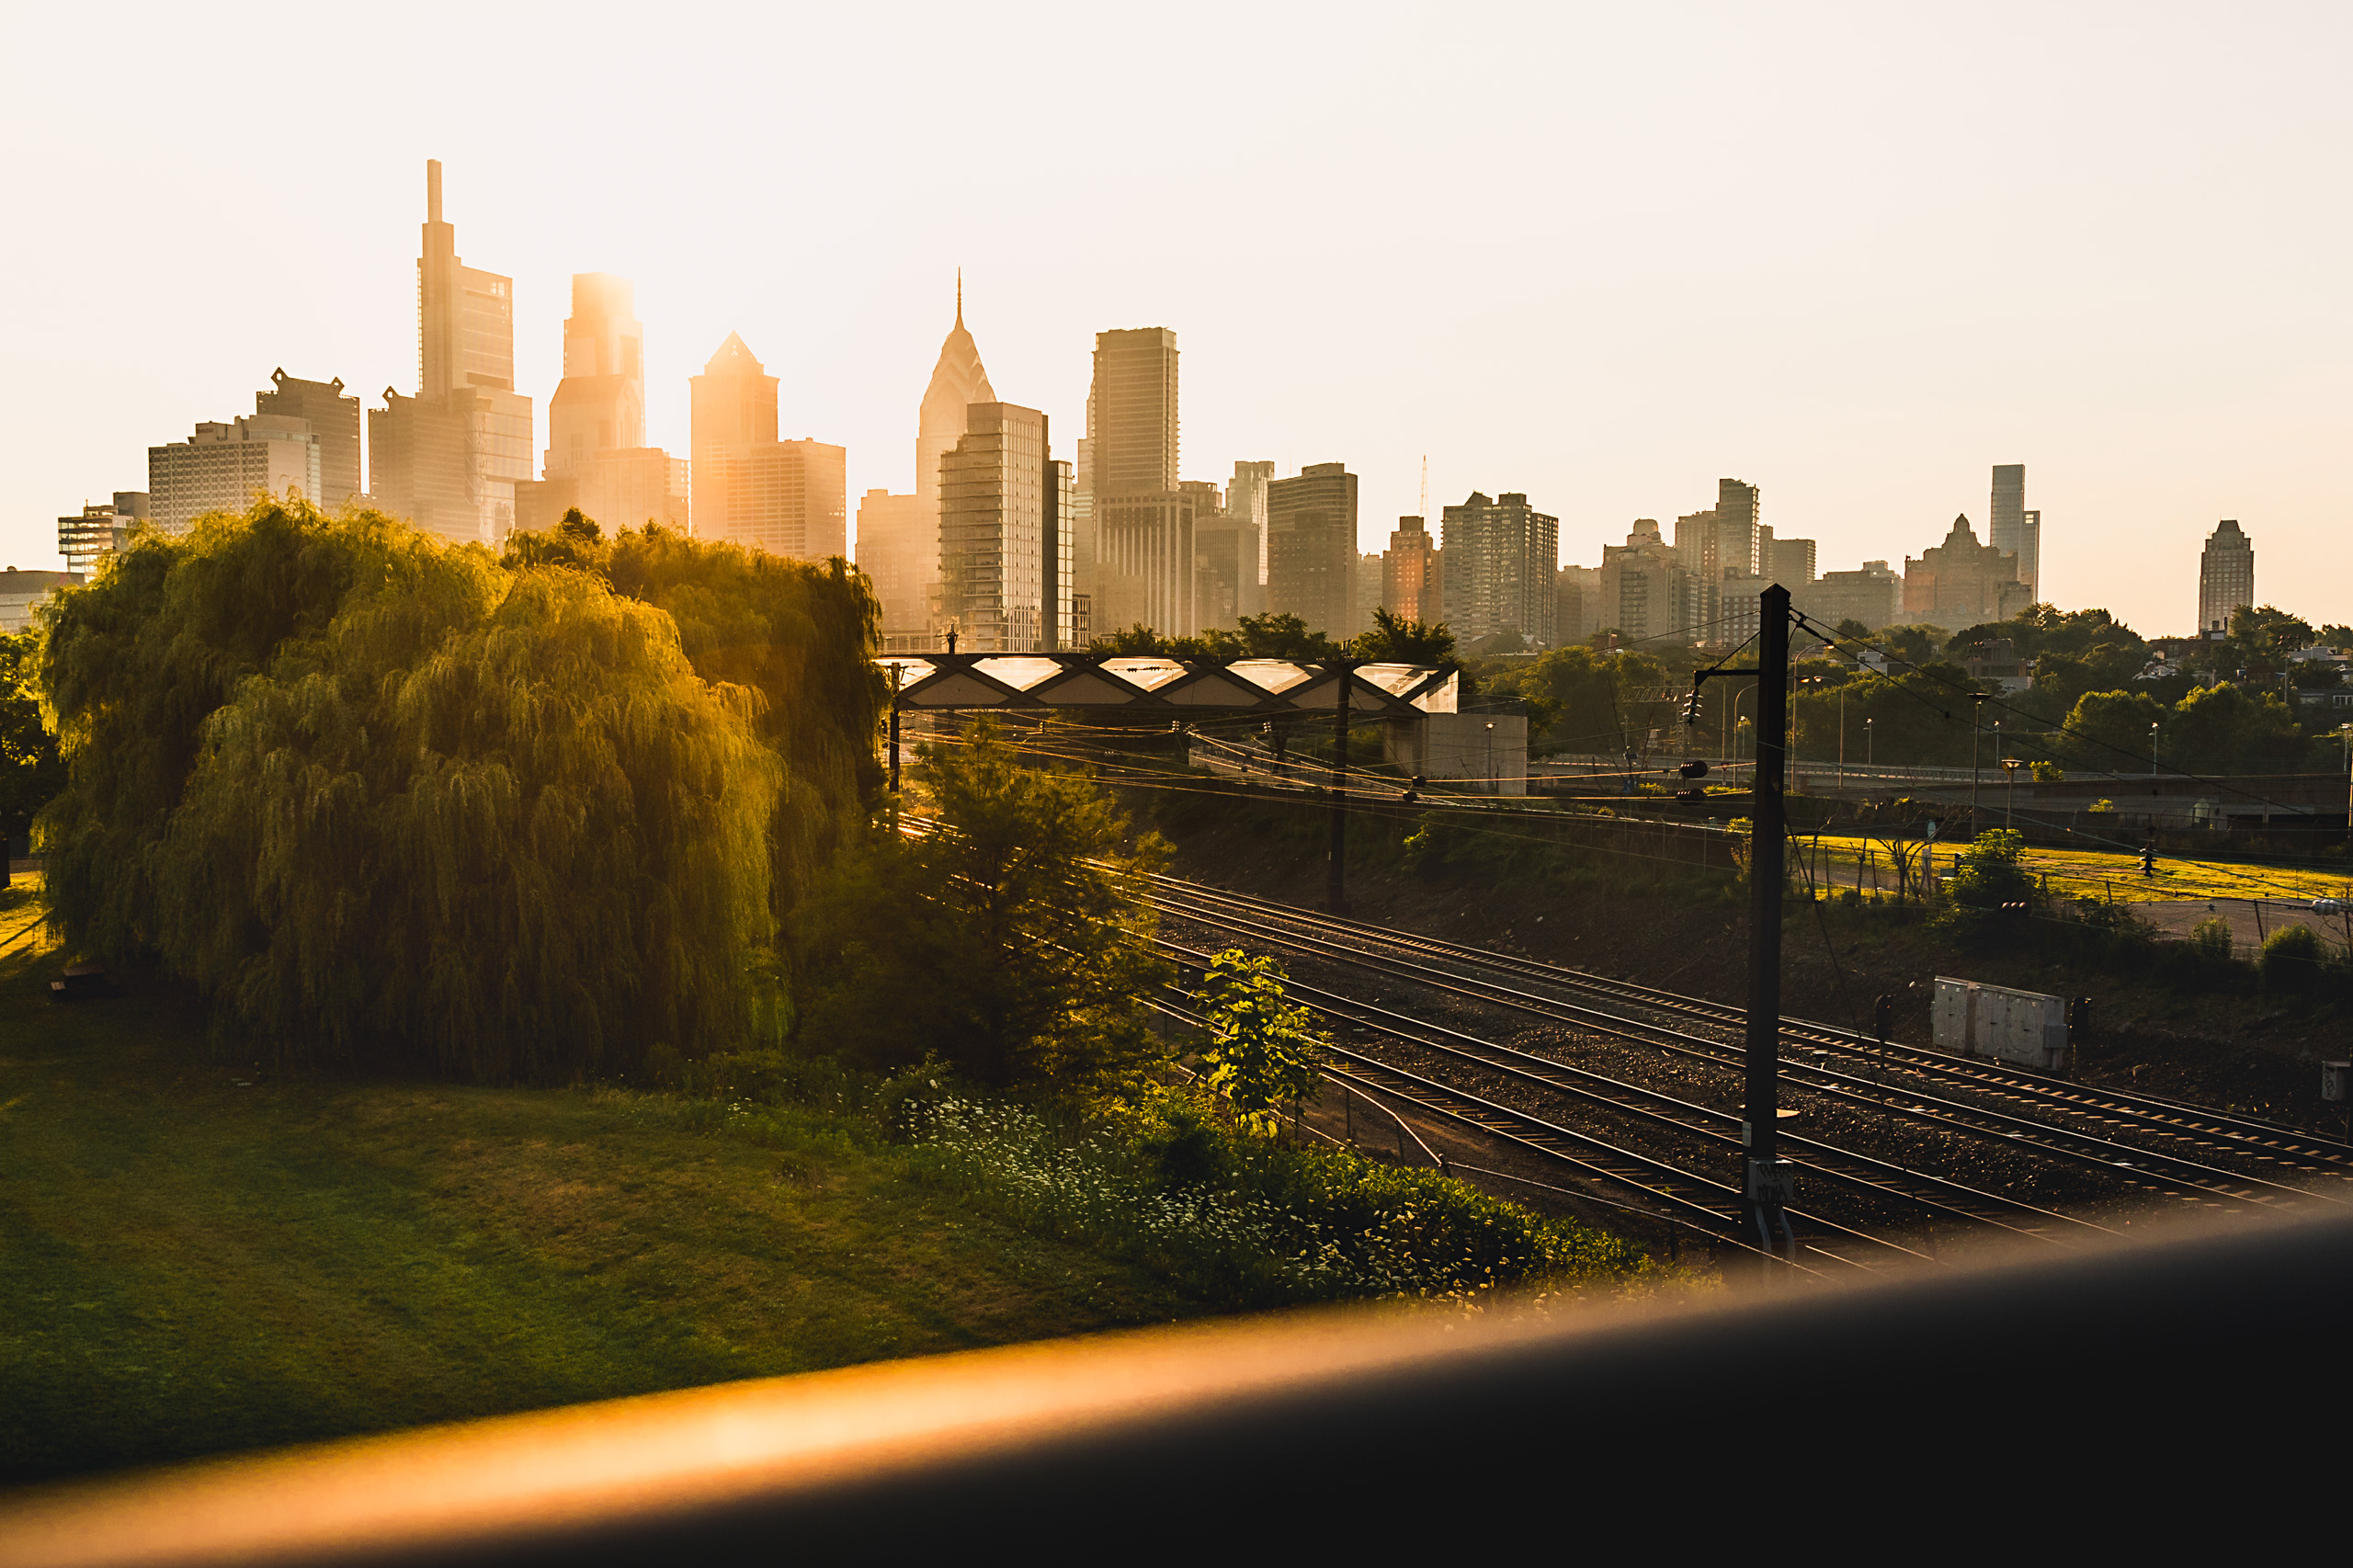 Philadelphia skyline from South Street Bridge at sunrise with railroad tracks in the foreground